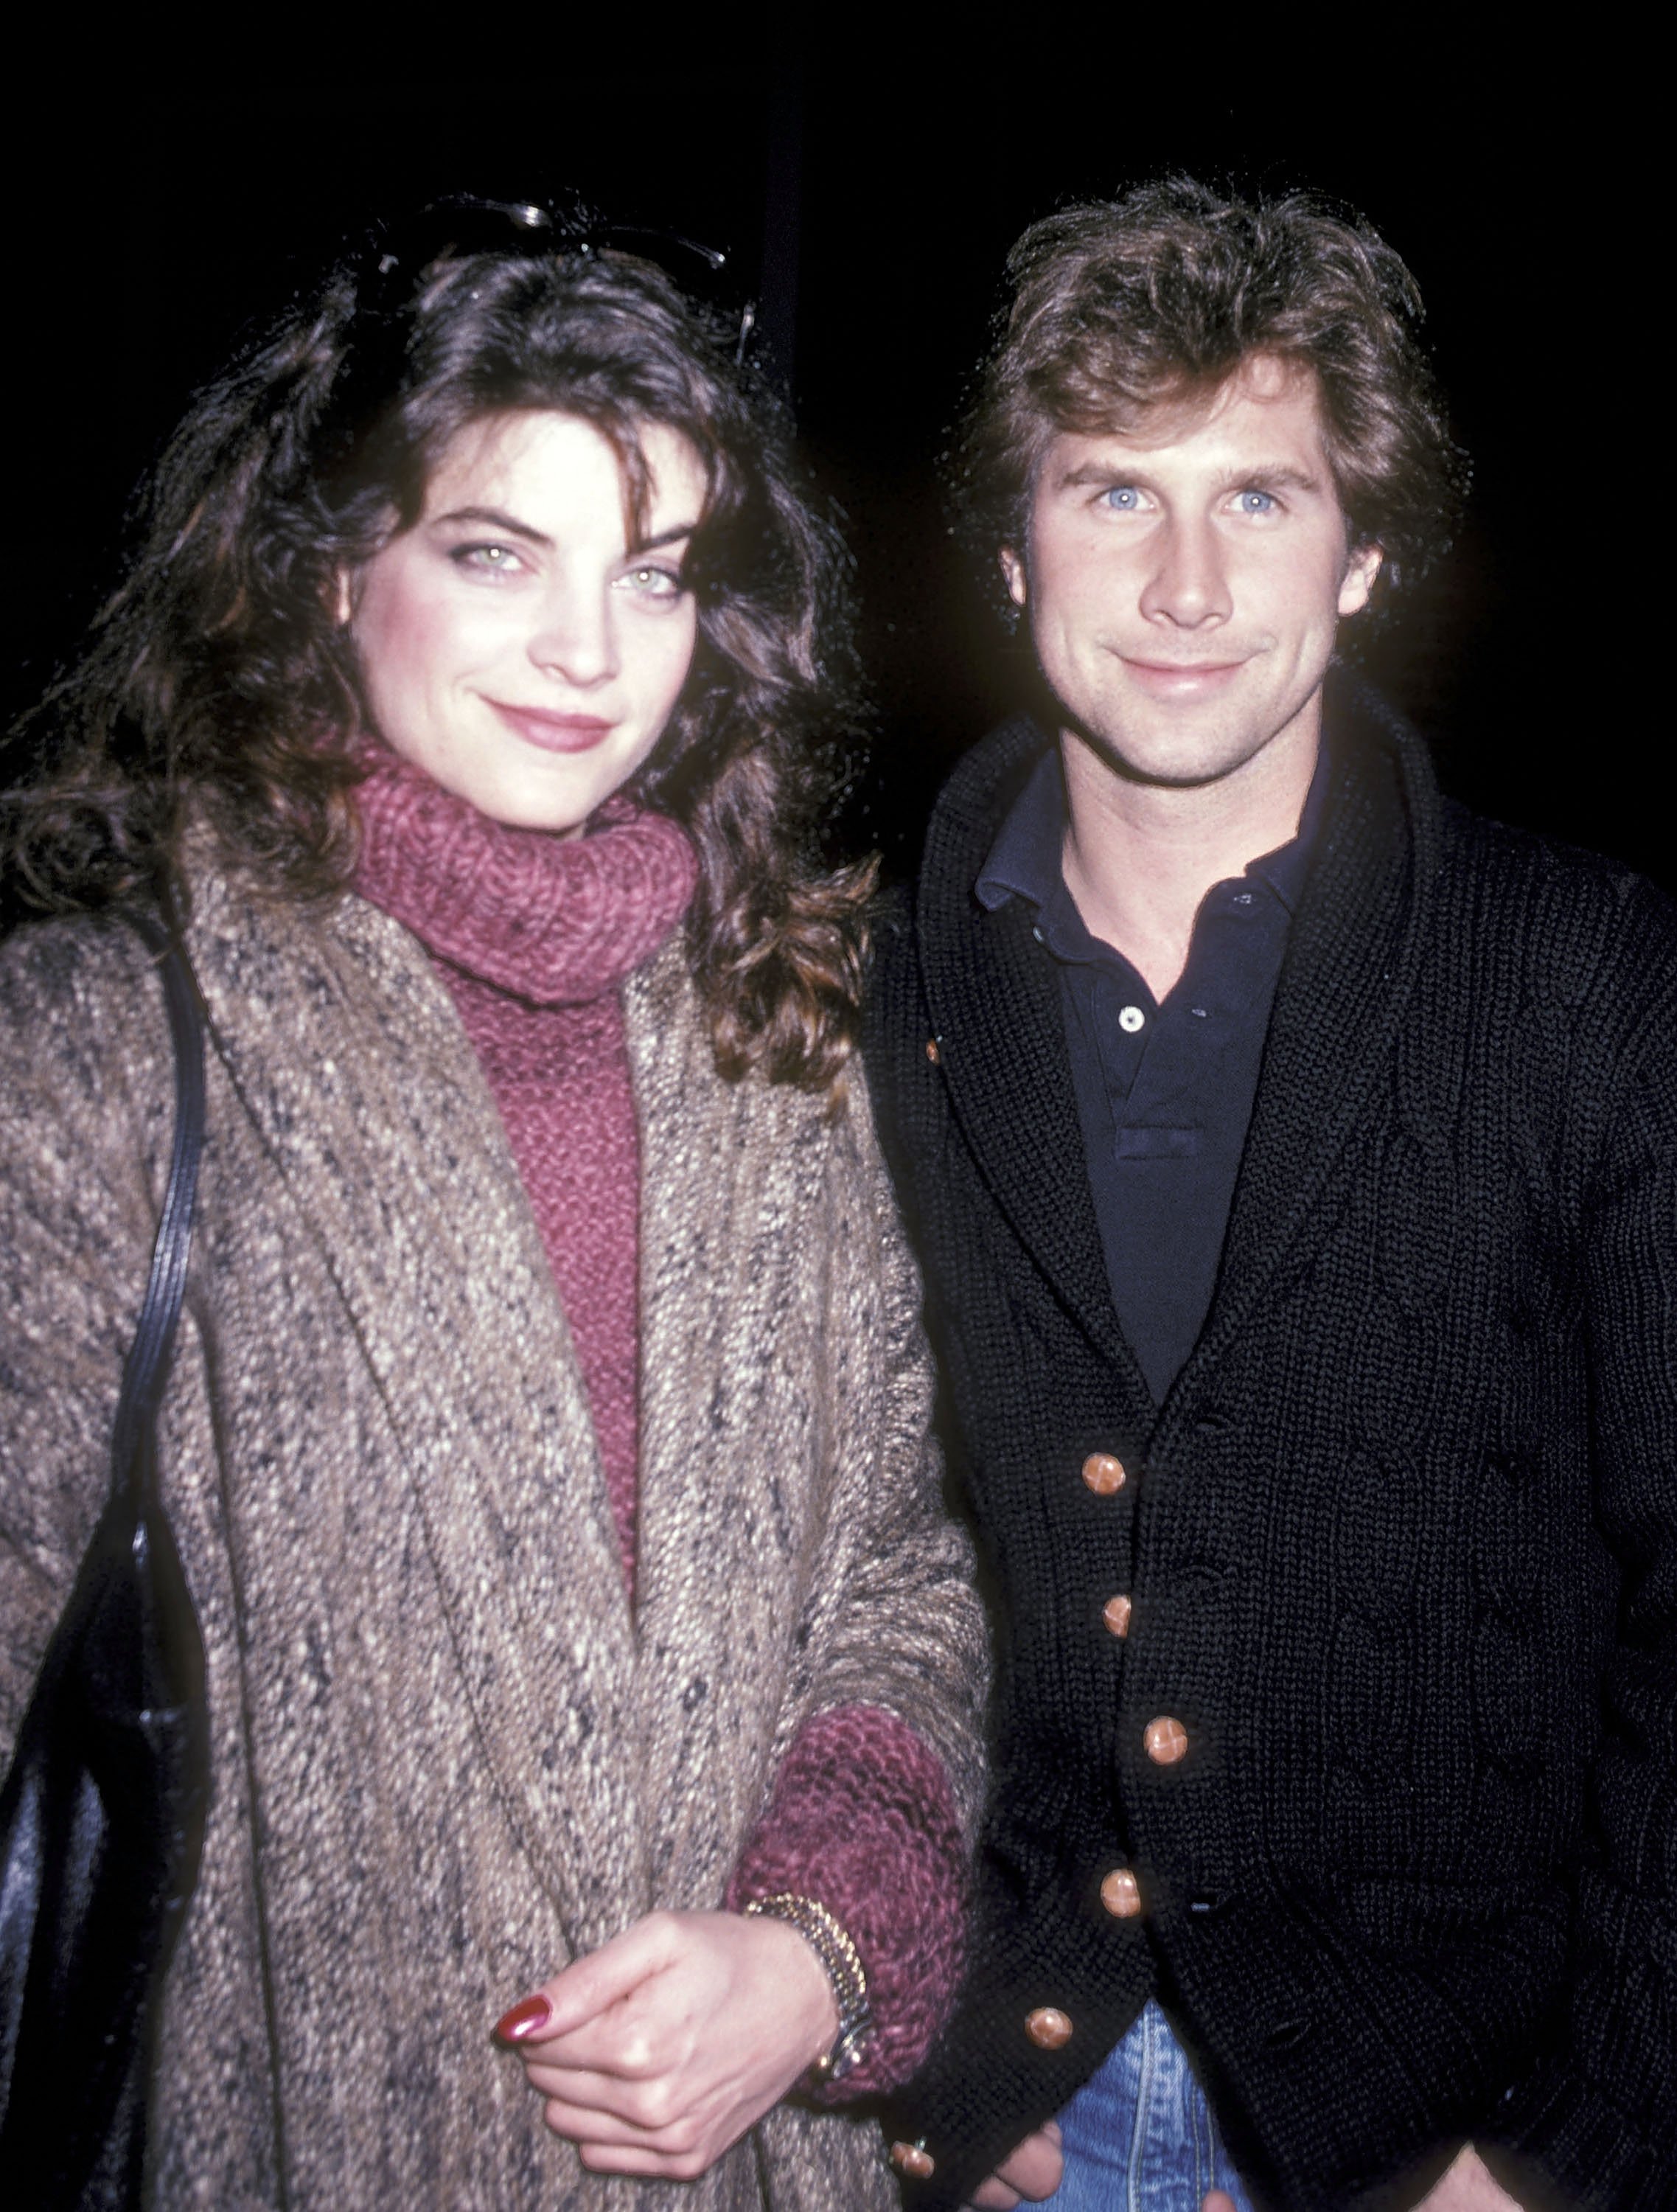 Actress Kirstie Alley and actor Parker Stevenson at the Screening of ABC's Made-for-Television Movie "Divorce Wars: A Love Story" on February 12, 1982. | Source: Getty Images